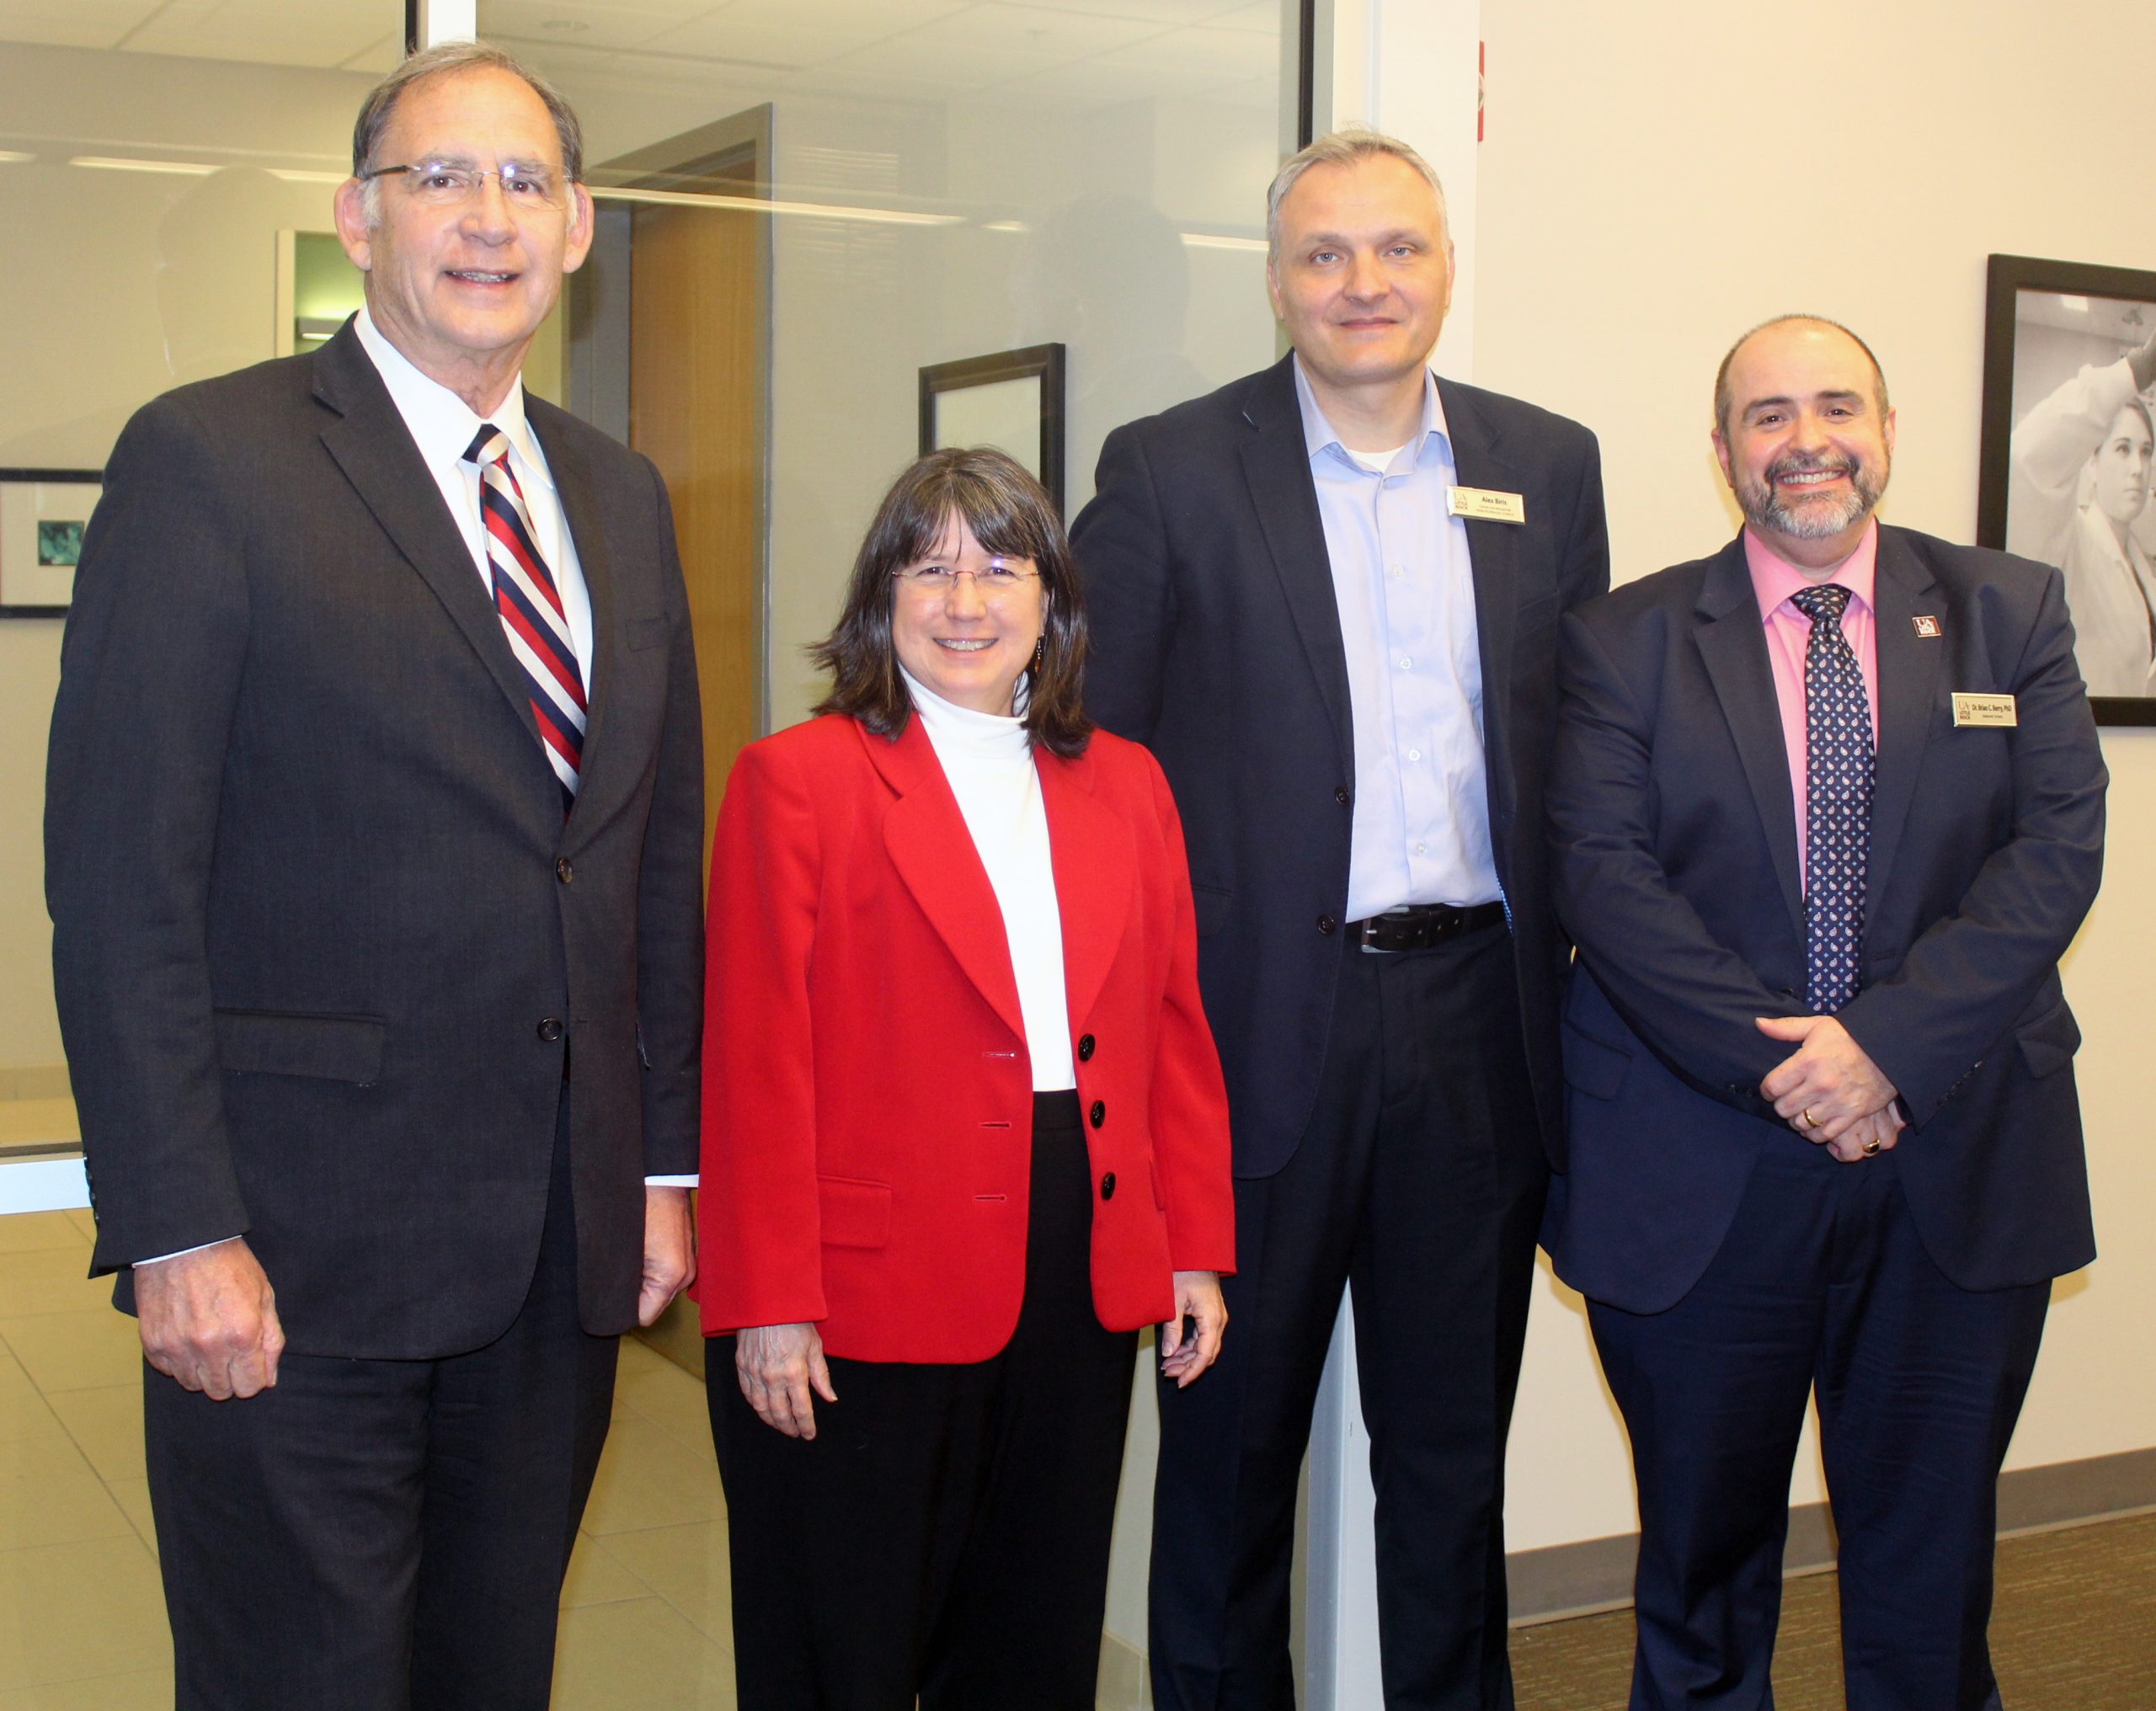 Sen. John Boozman (left) visits with Chancellor Christina Drale, Dr. Alex Biris, and Dr. Brian Berry during a research visit at UA Little Rock.